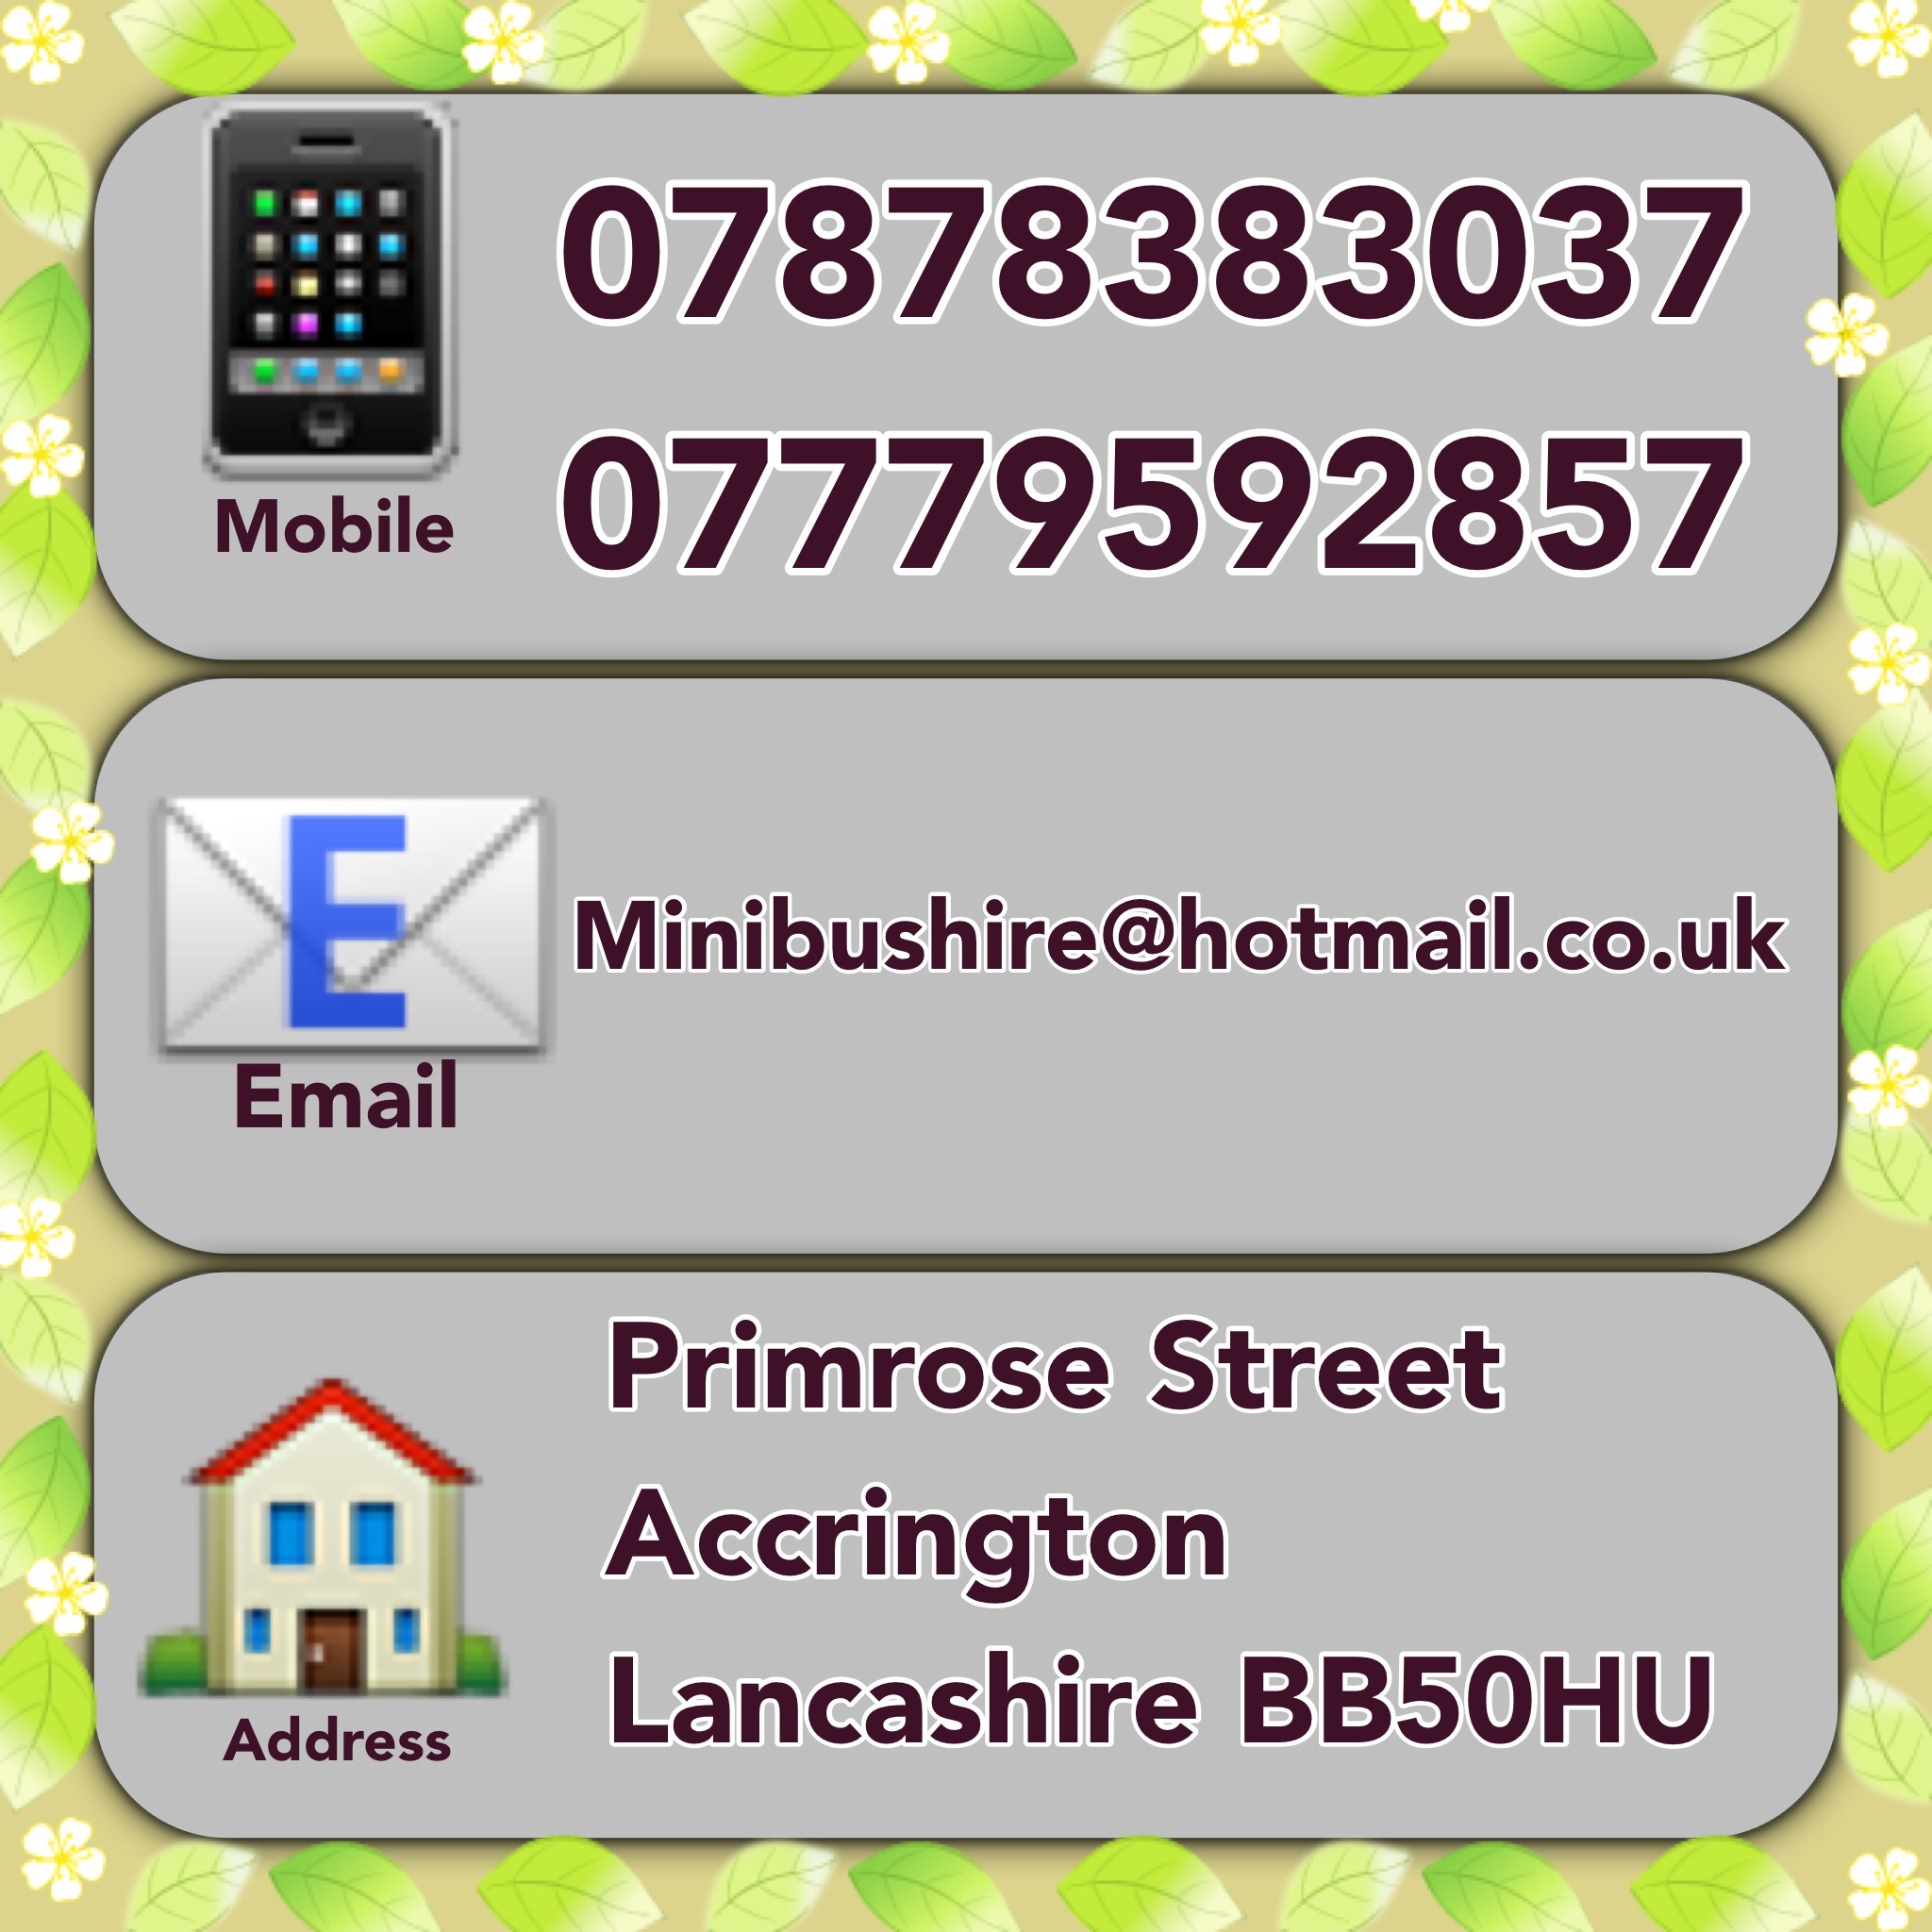 AdContact details